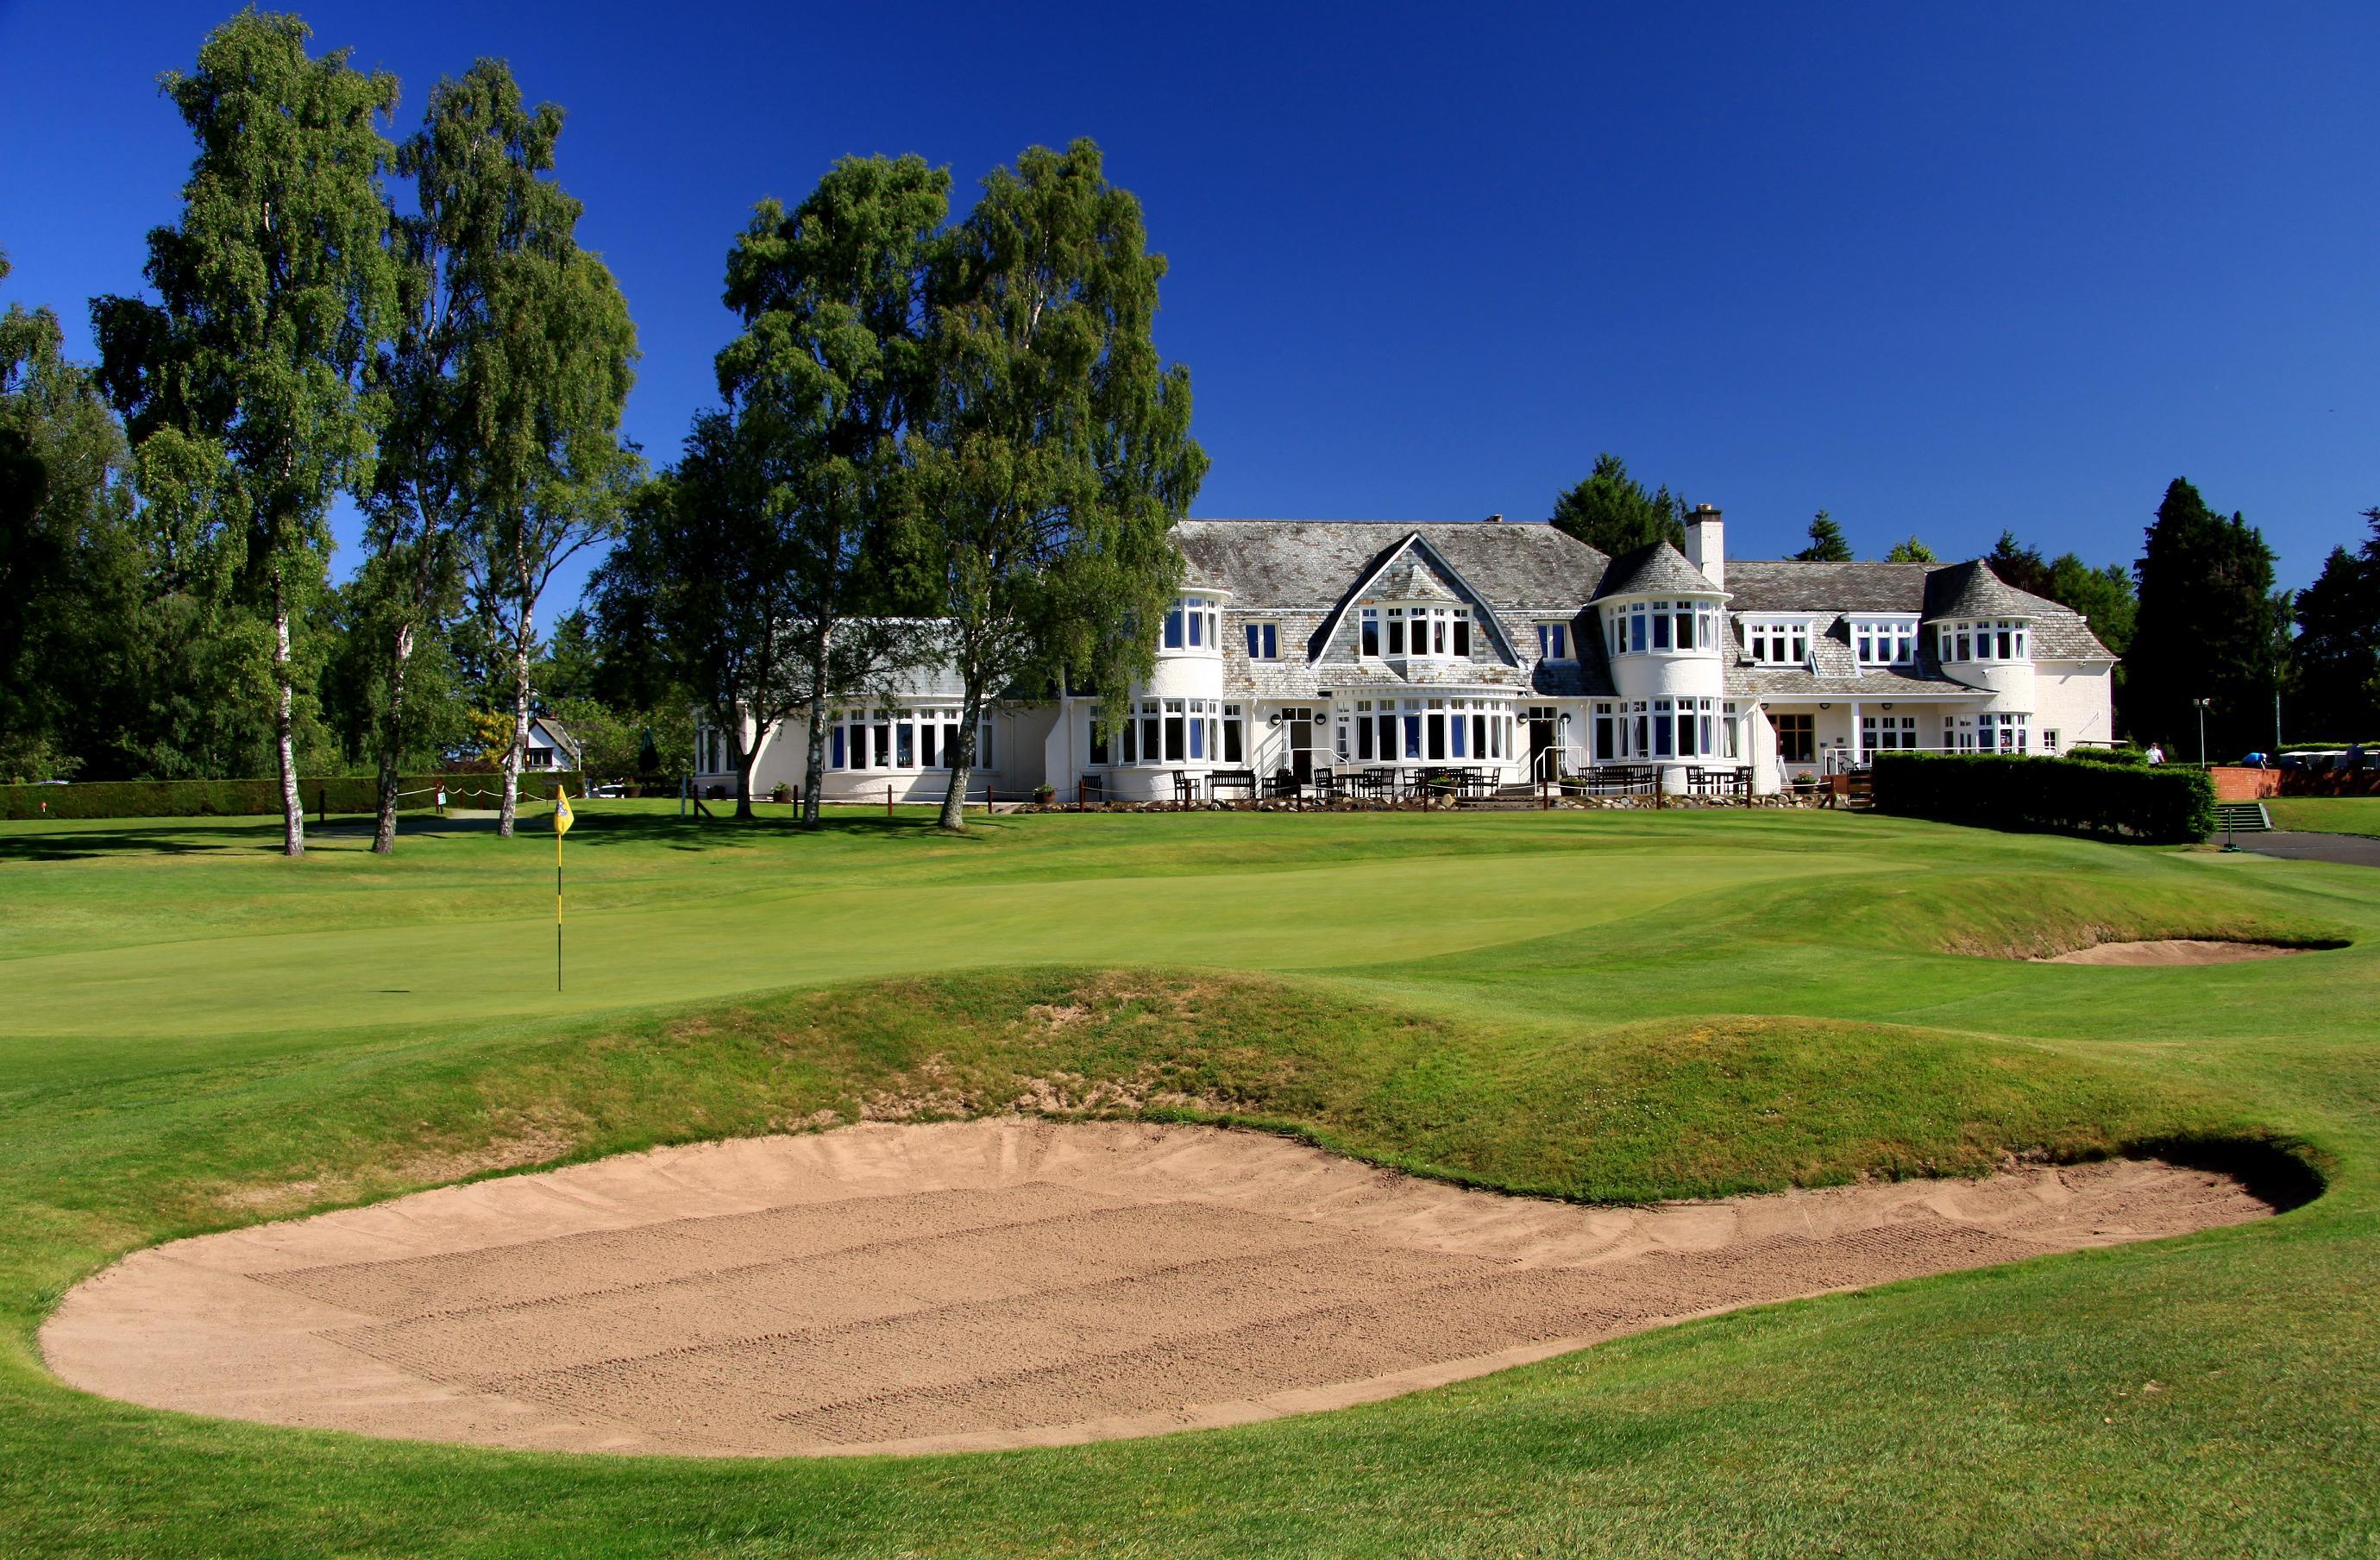 Blairgowrie Golf Club is the host of this week's Scottish Amateur.